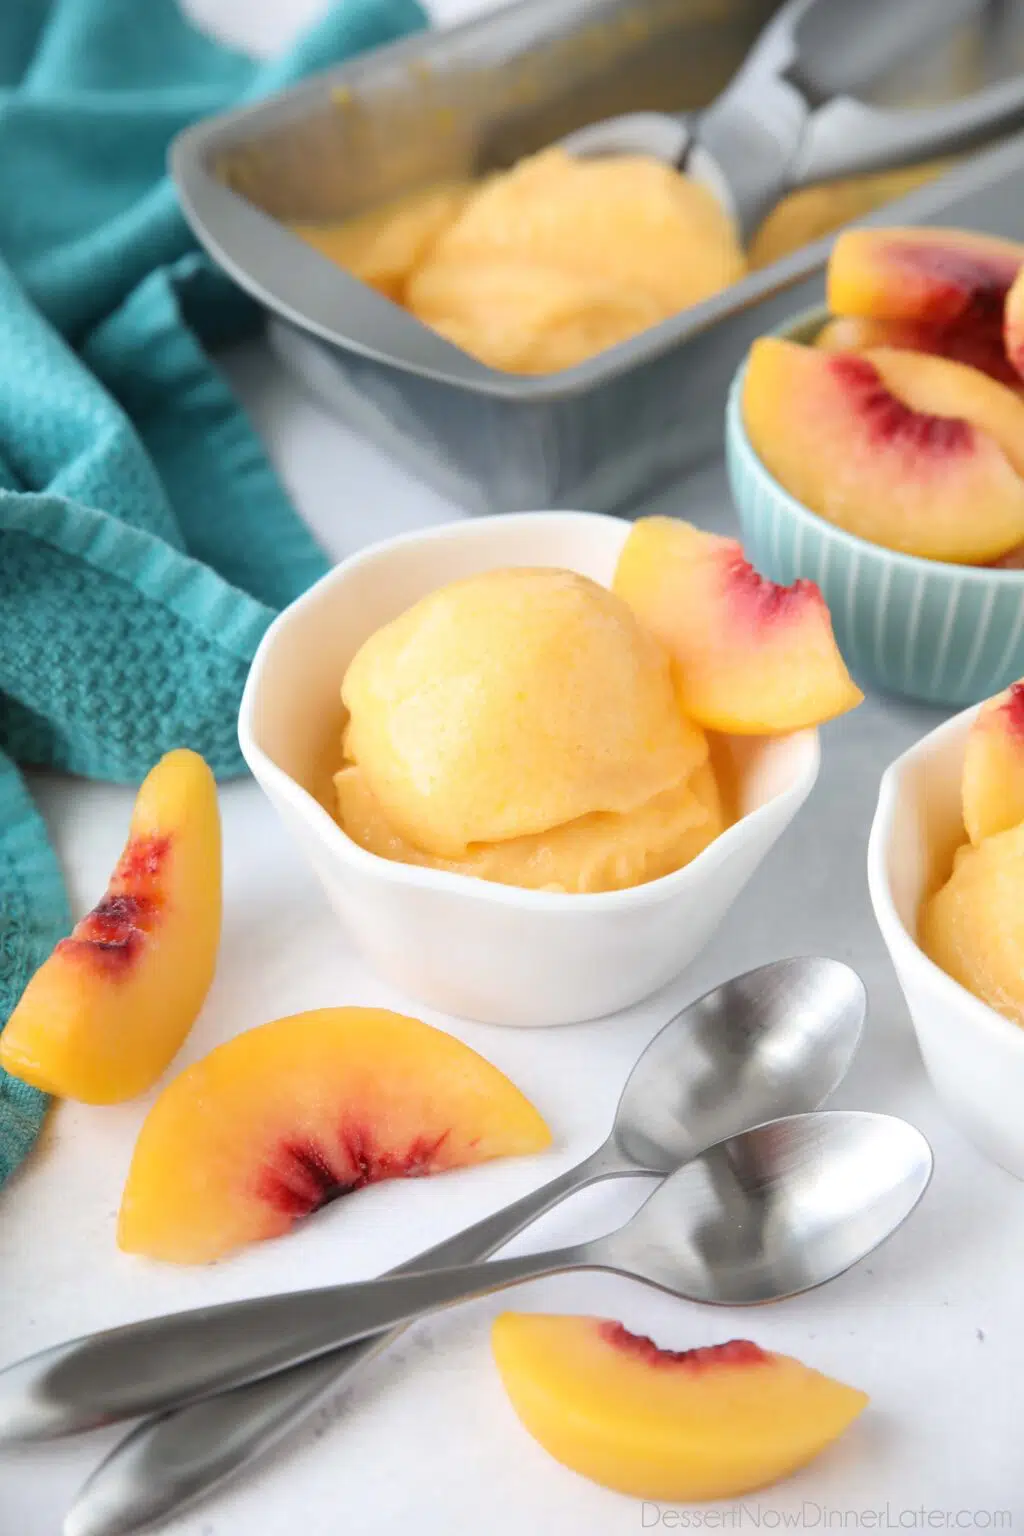 Explore a variety of peach recipes including peach cobbler, peach pie, refreshing peach martini, and more. Perfect for desserts and drinks.